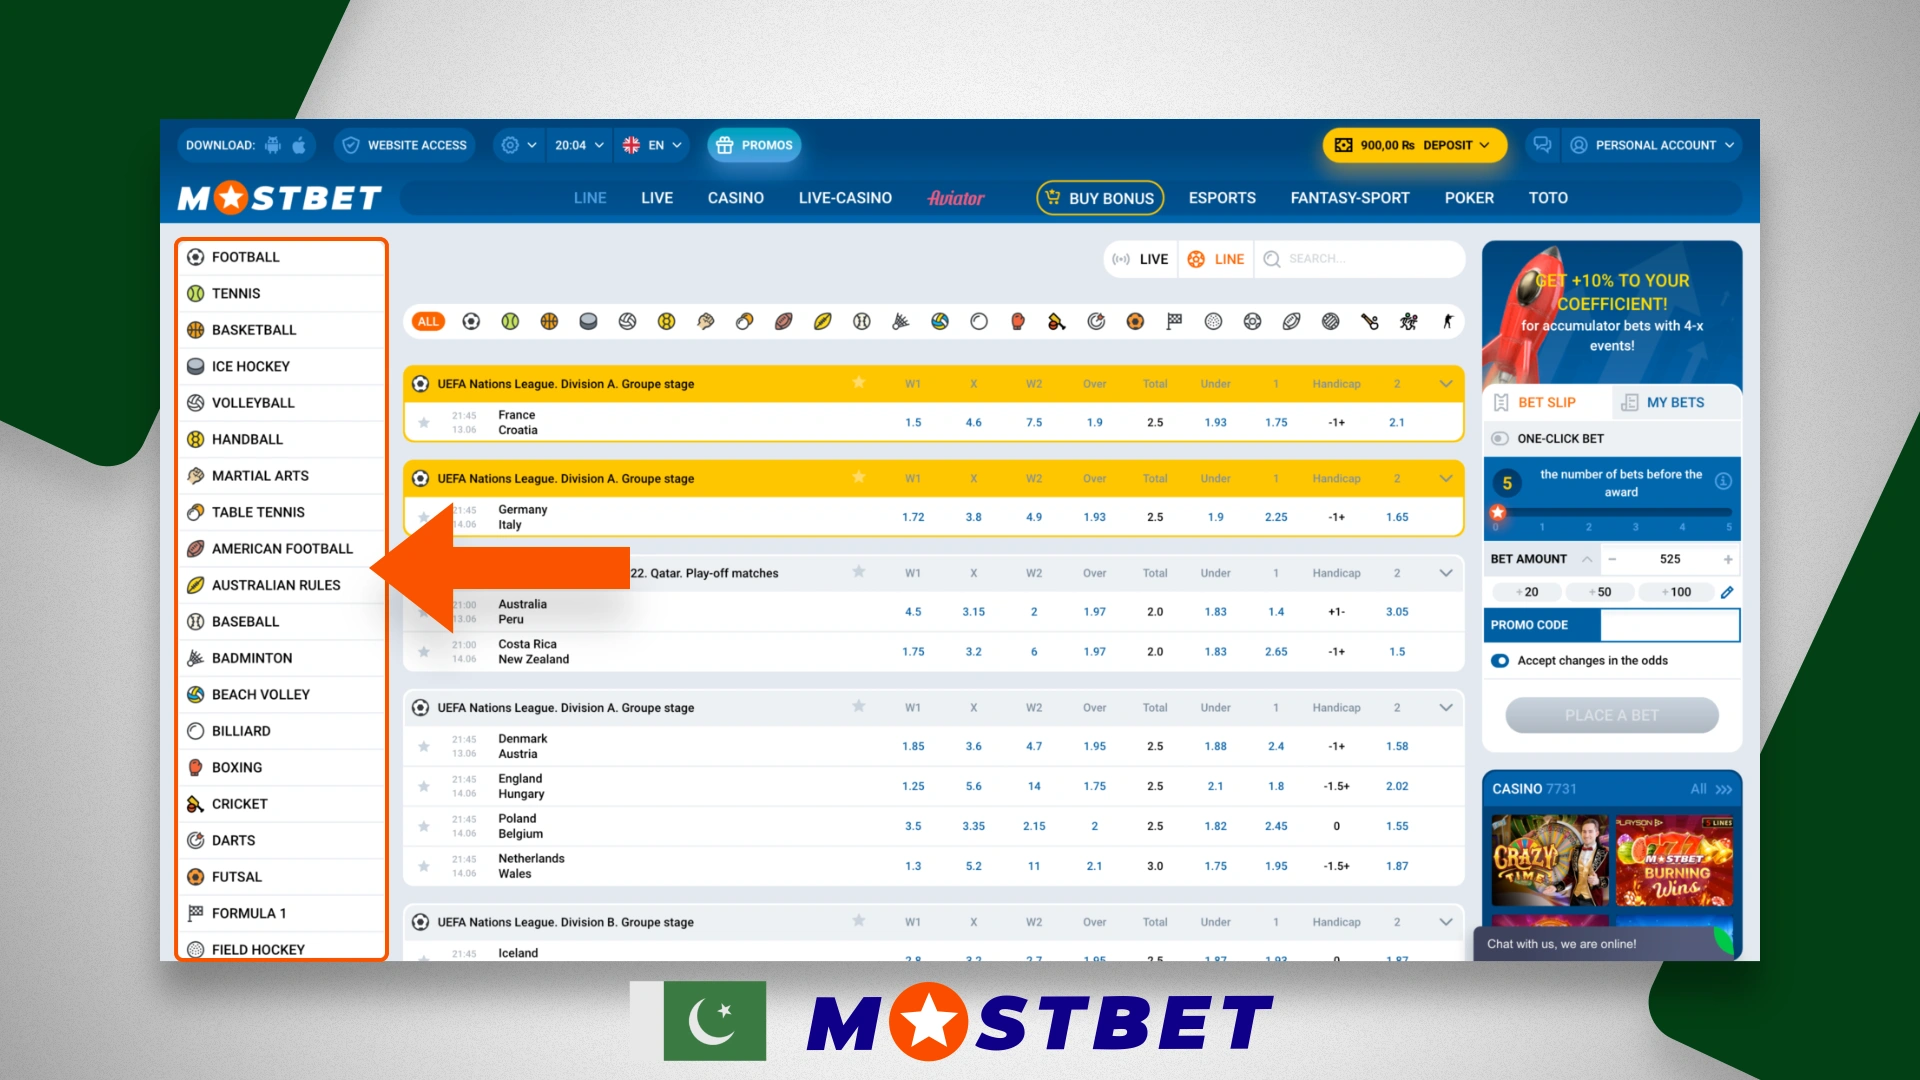 List of available sports on which you can bet on the official website Mostbet Pakistan